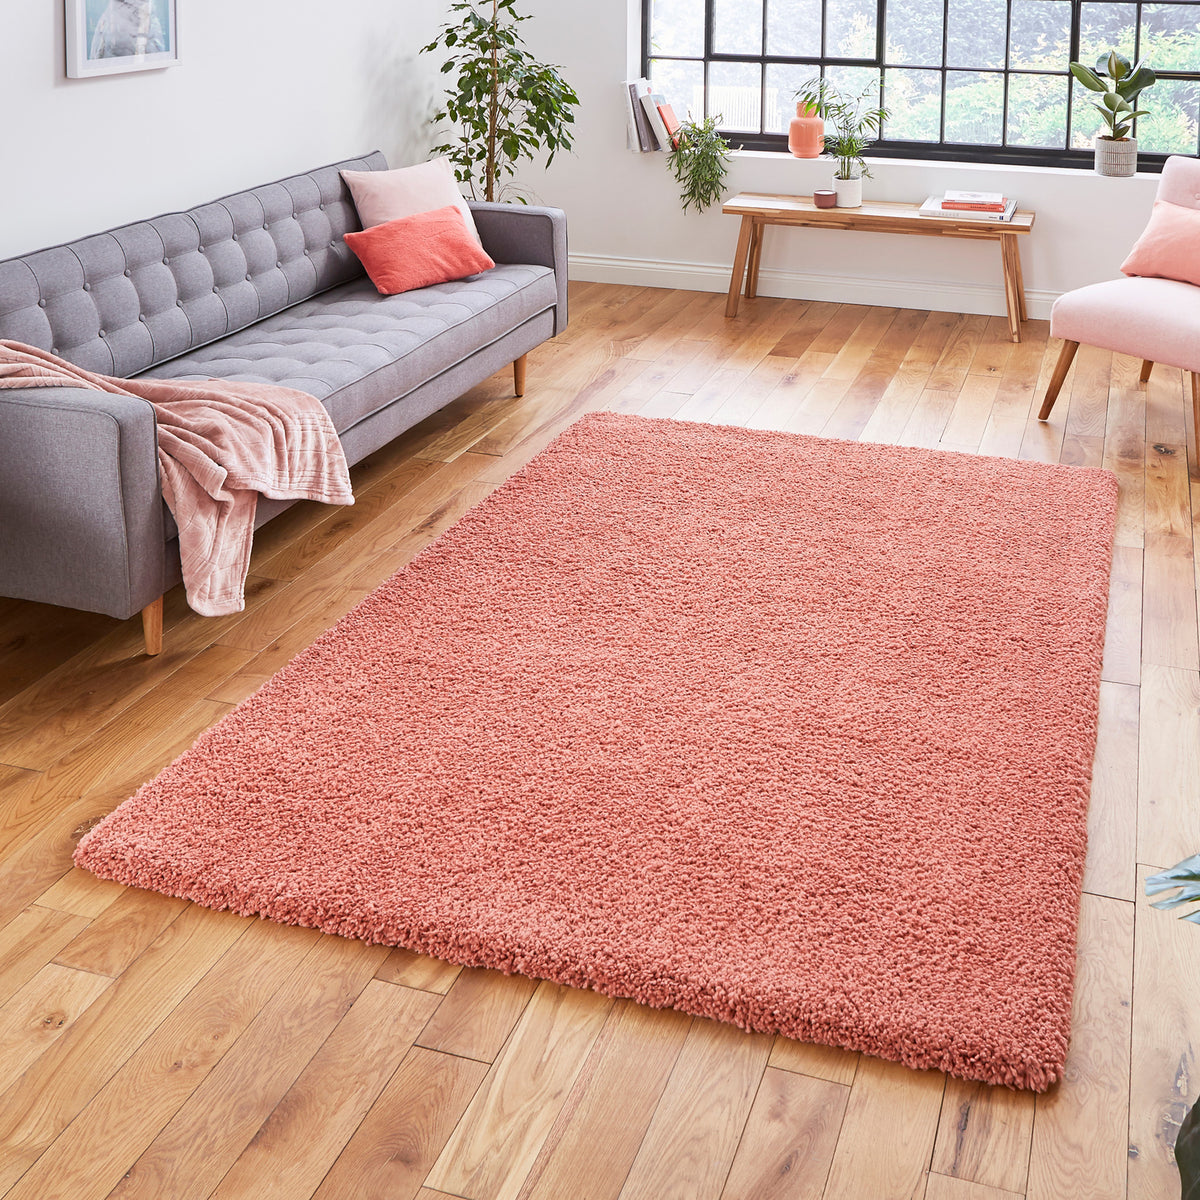 Roswell Pastel Peach Stain Resistant Shaggy Rug for living room